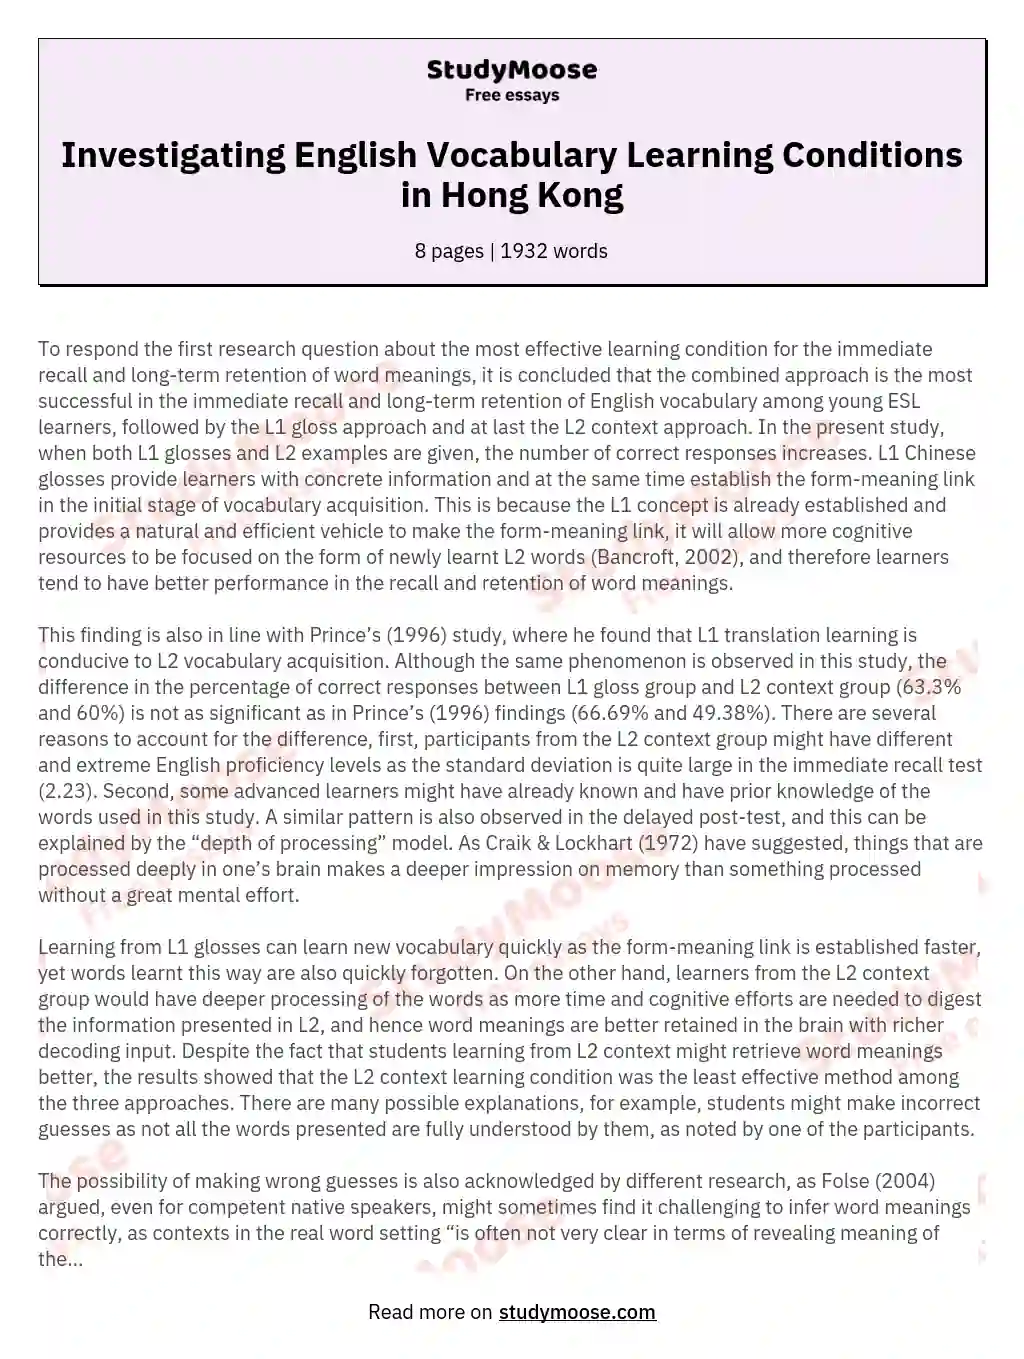 Investigating English Vocabulary Learning Conditions in Hong Kong essay